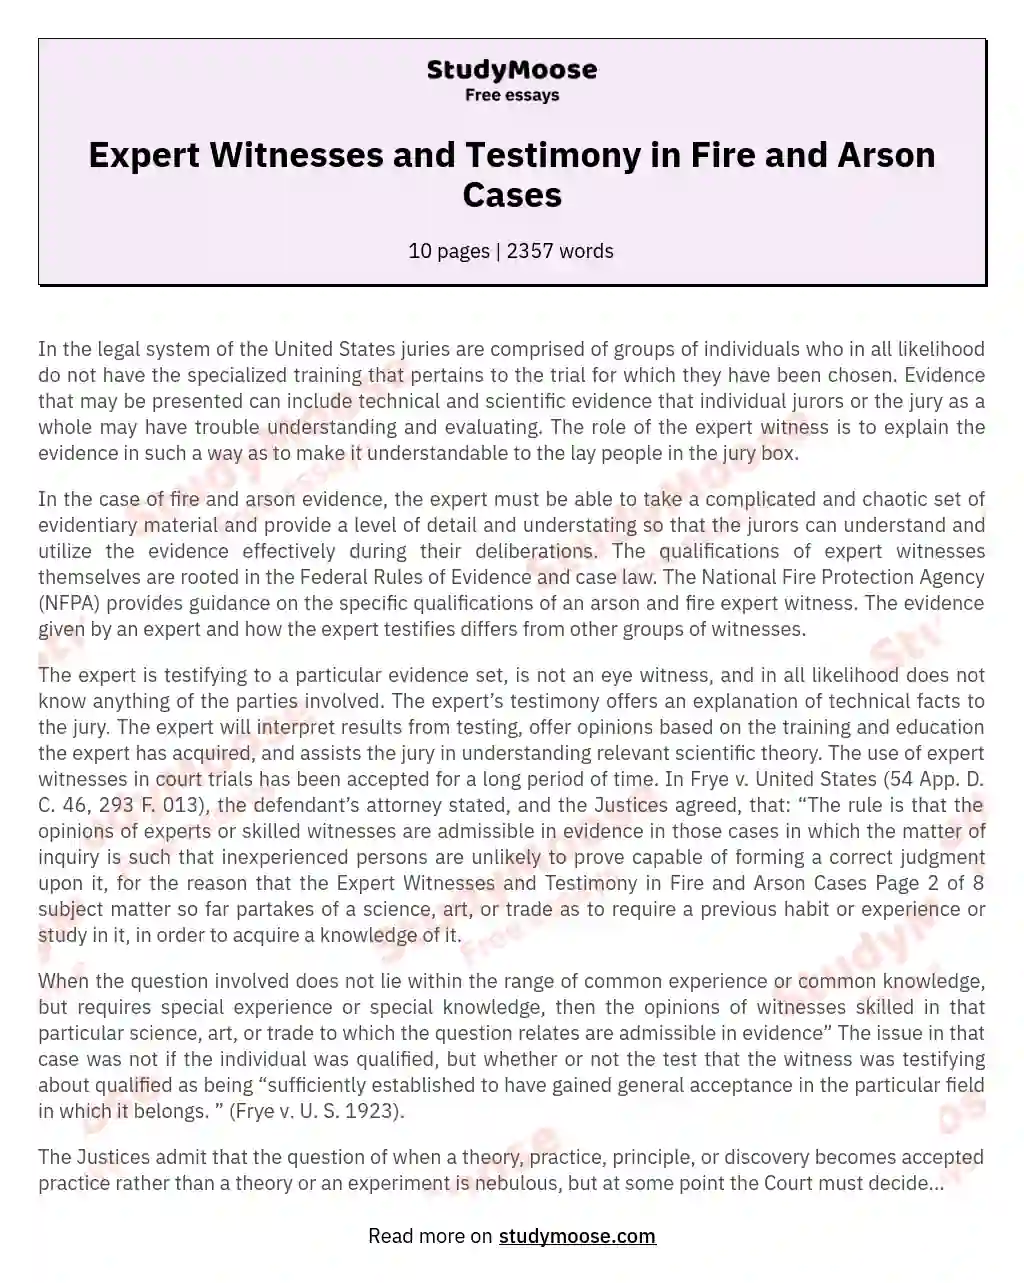 Expert Witnesses and Testimony in Fire and Arson Cases